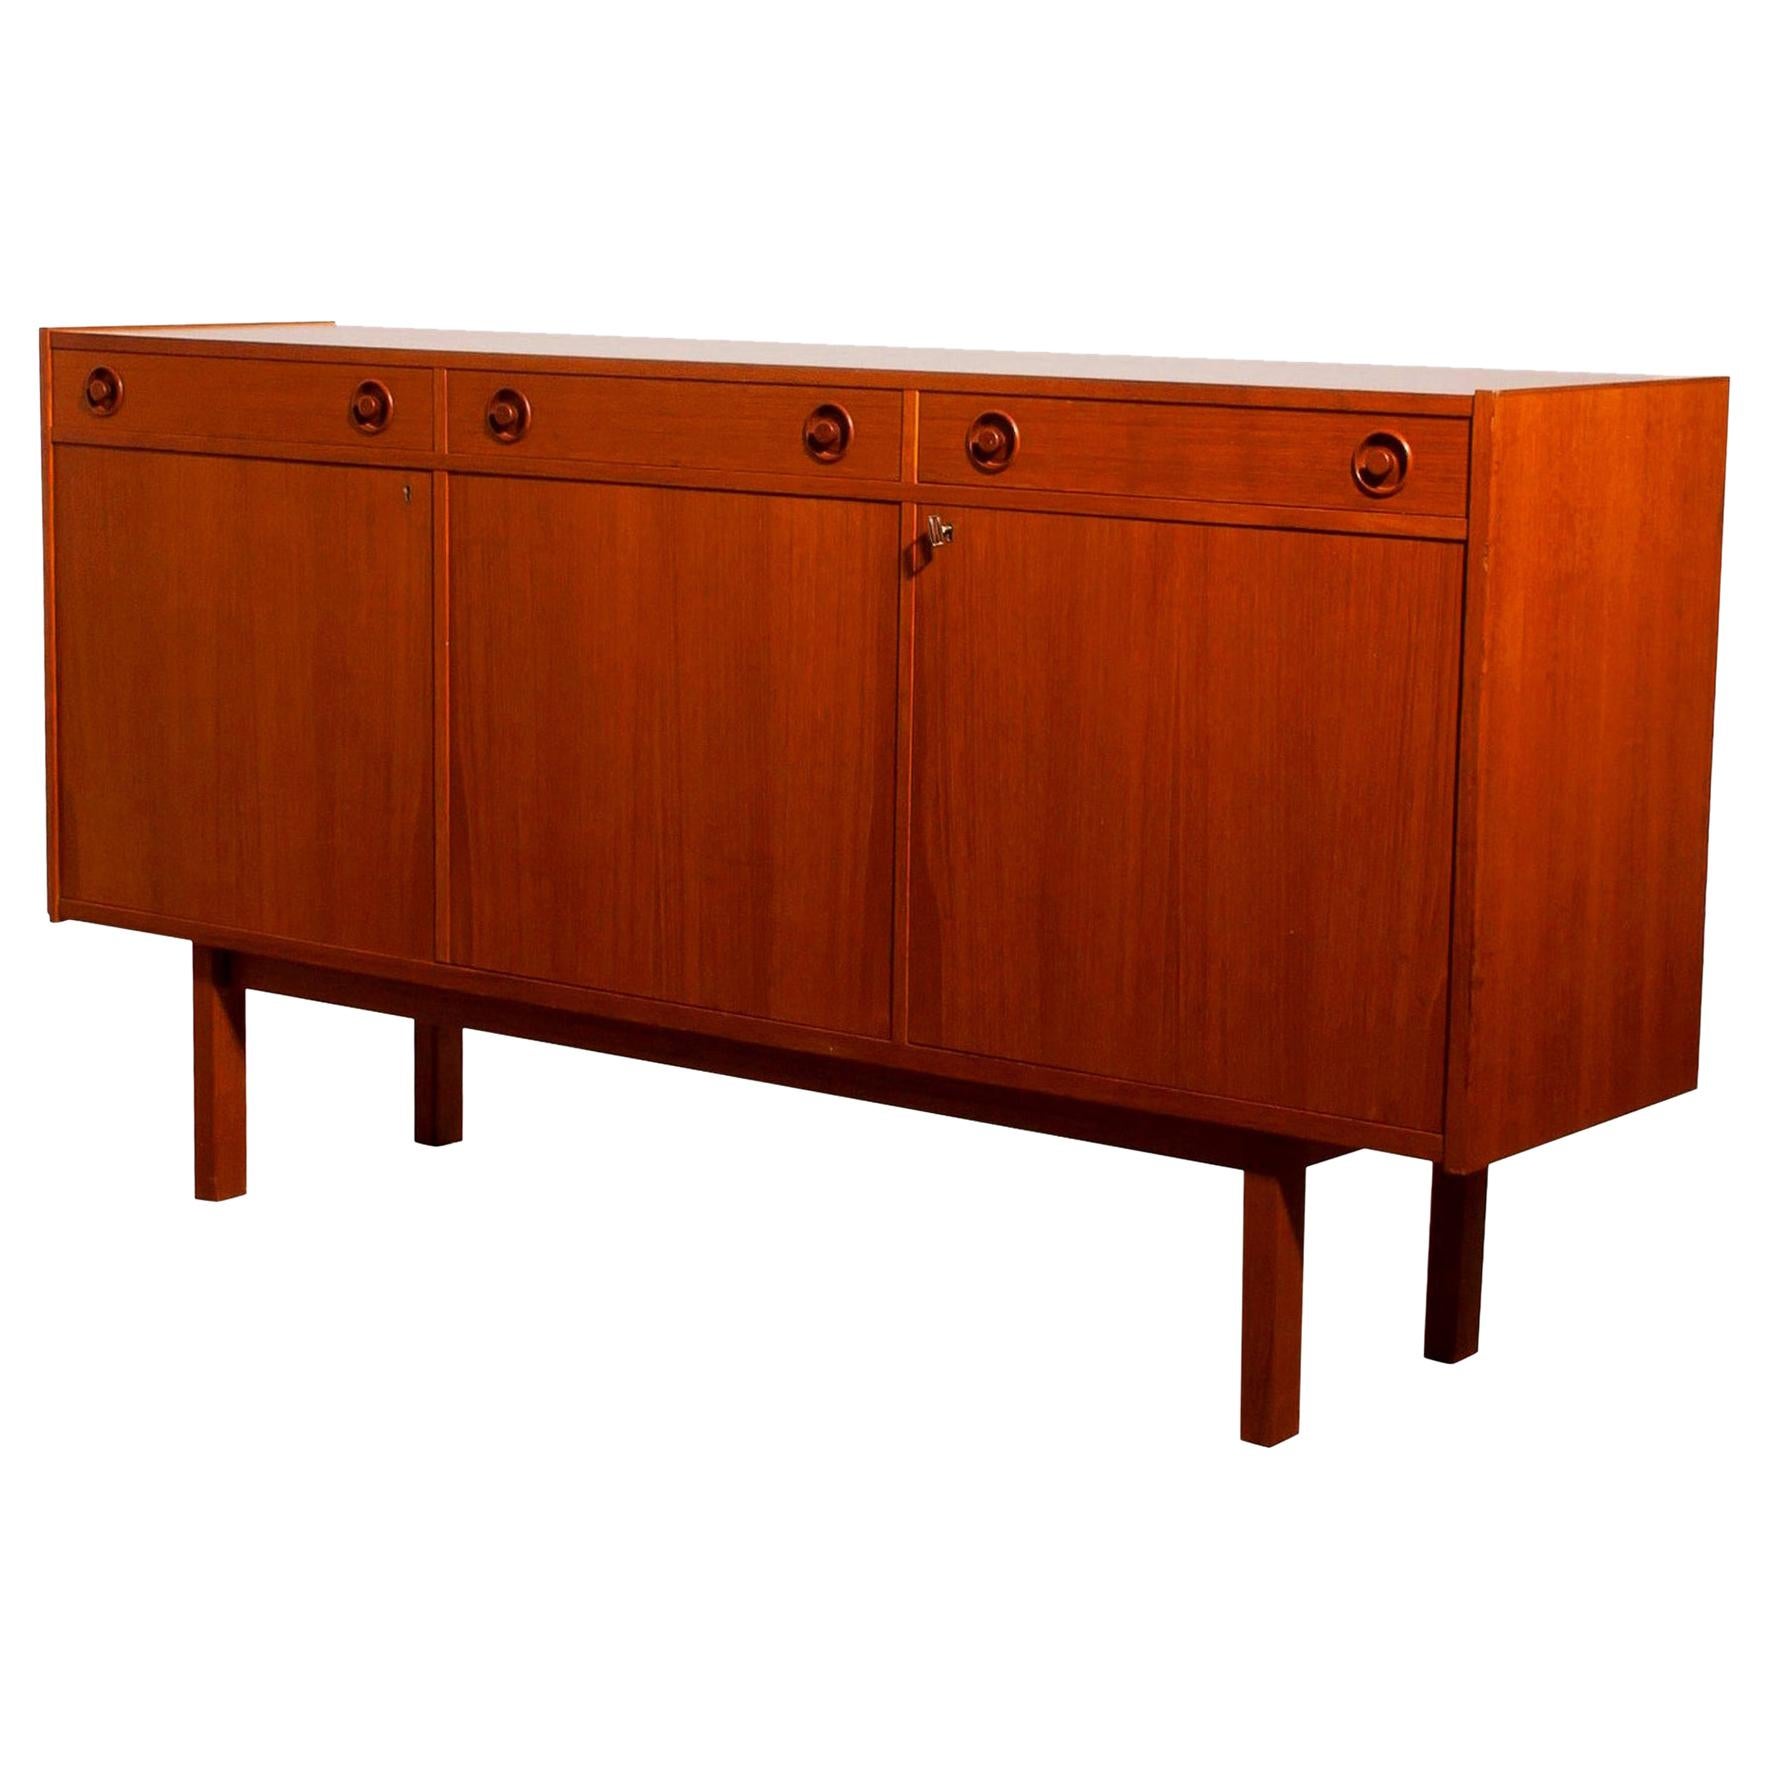 Beautiful sideboard produced by Brexo Möbler, Sweden.
This cabinet is made of teak and has three drawers and three doors.
It is in very nice condition with just a little spot on the top.
Key included.
Period: 1950s.
Dimensions: H 90 cm, W 170